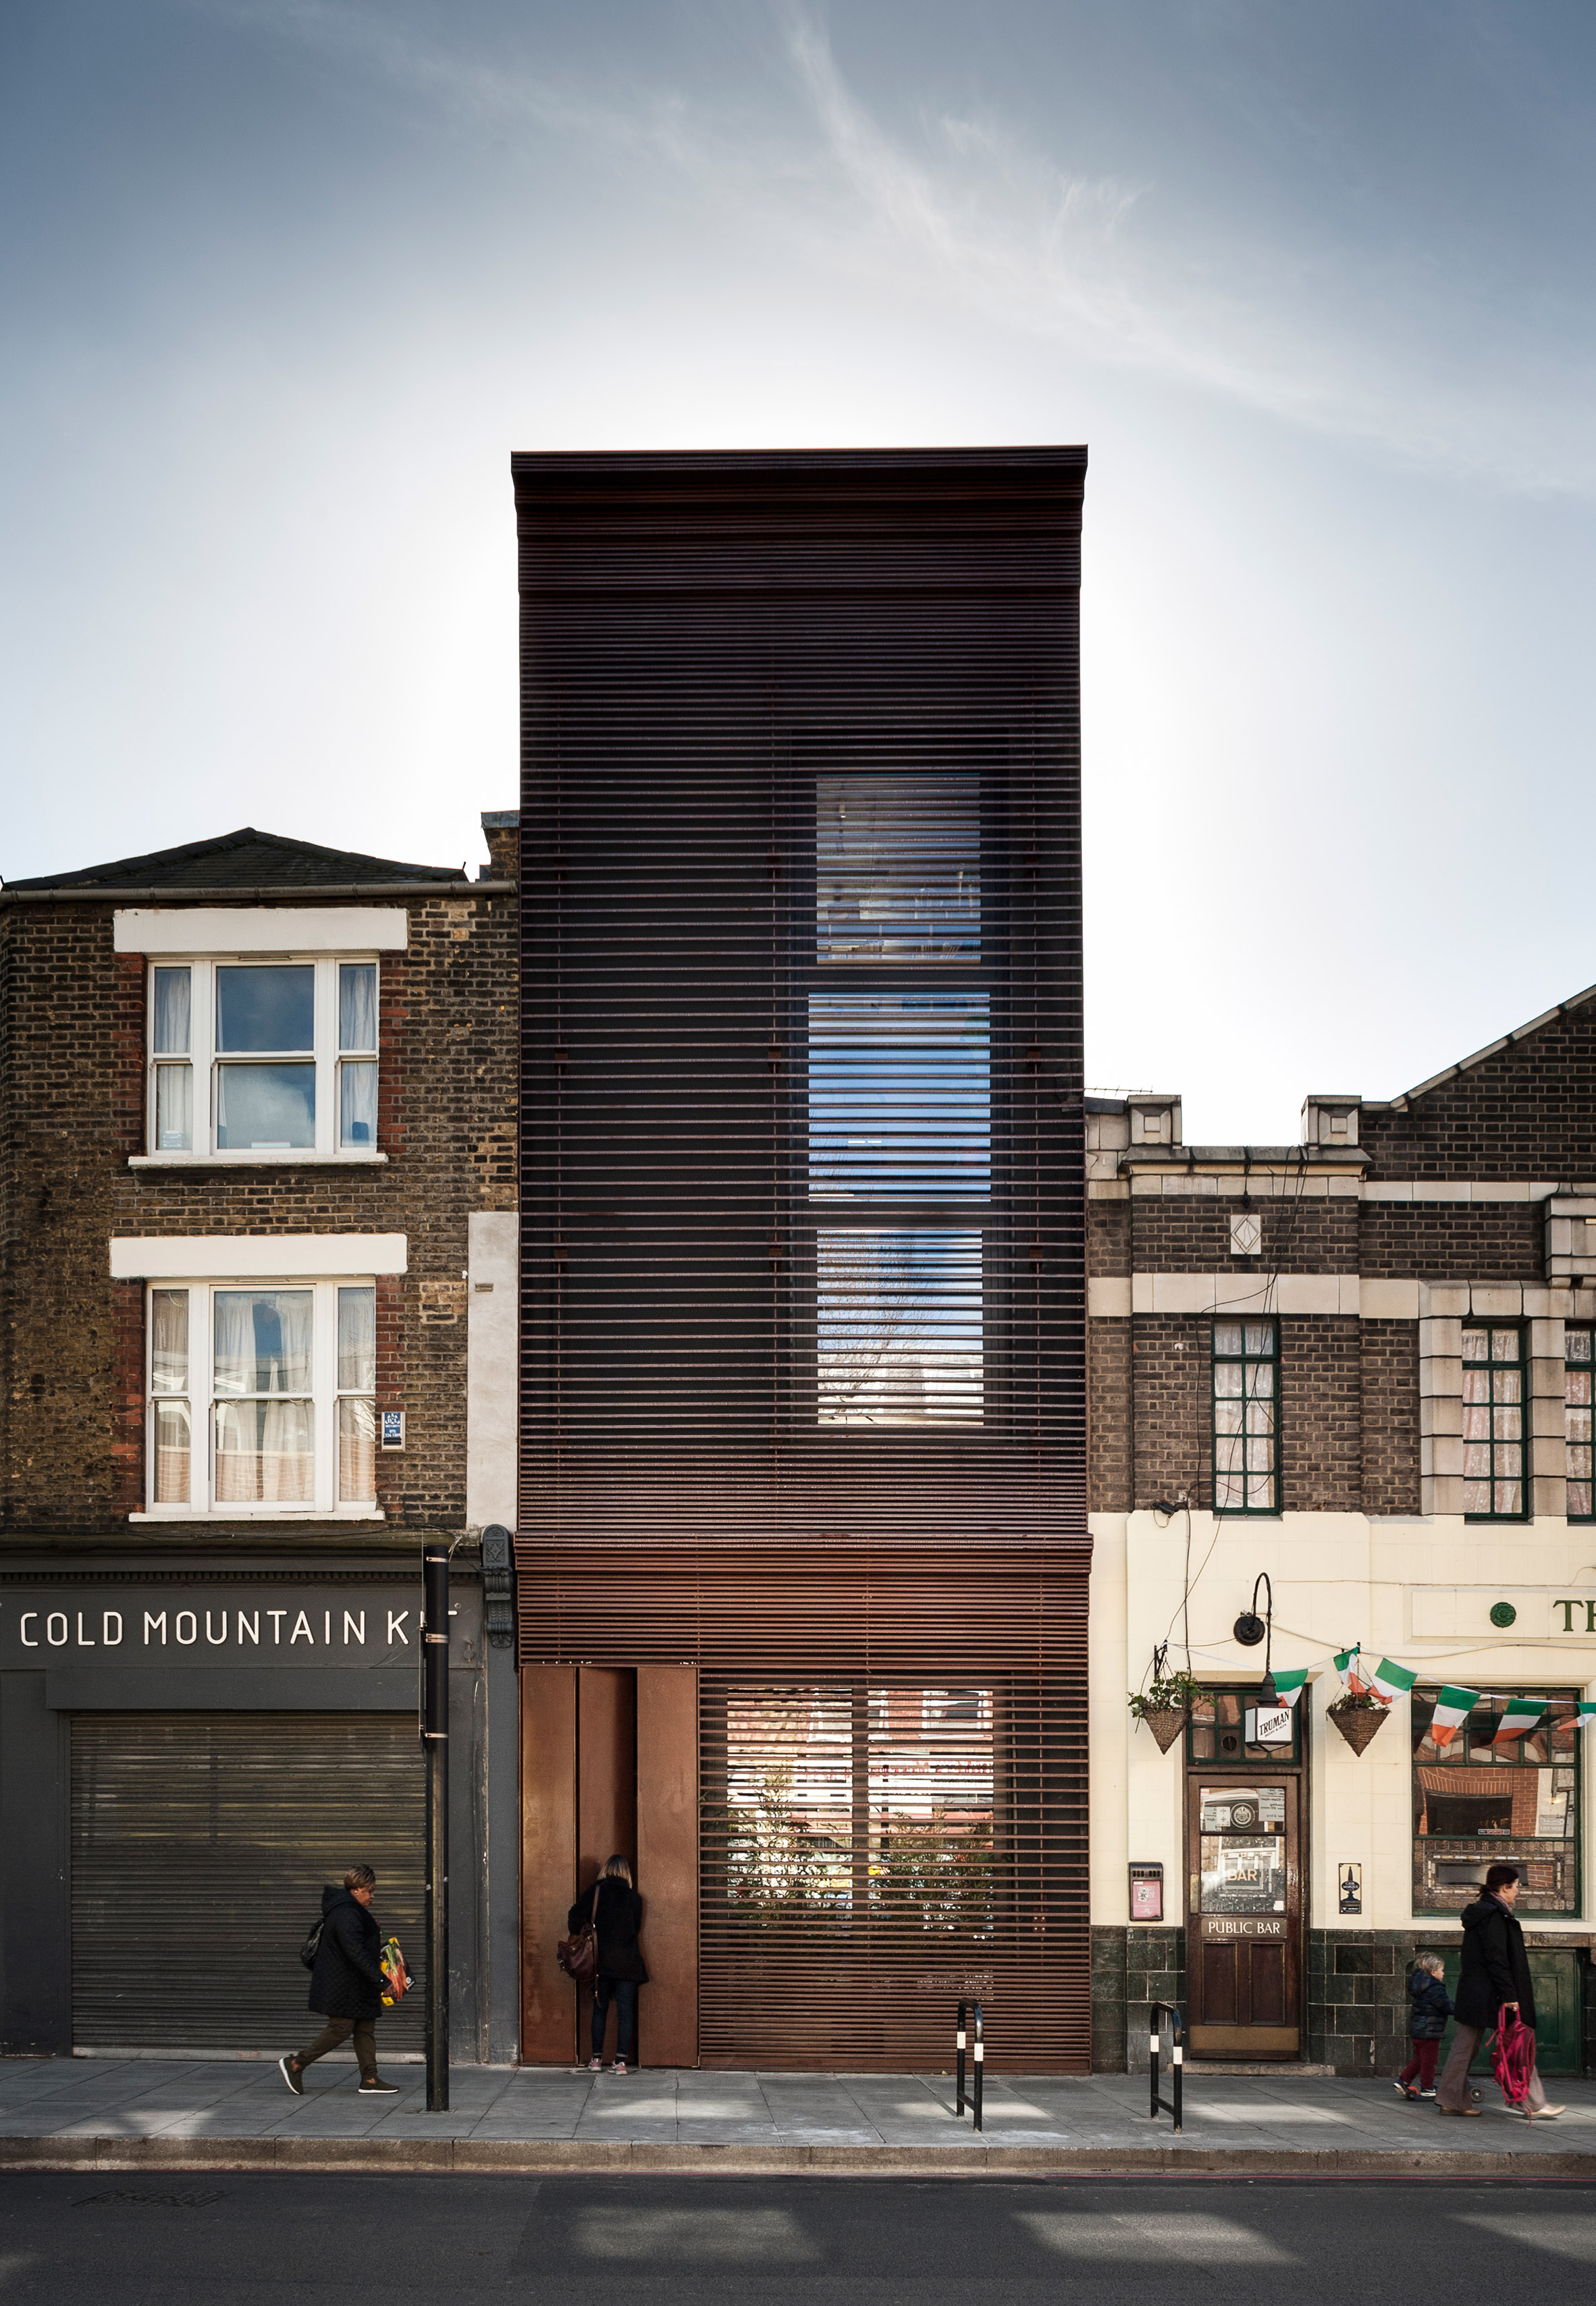 Slatted-steel facade allows partial views into jewellery workshop by DSDHA